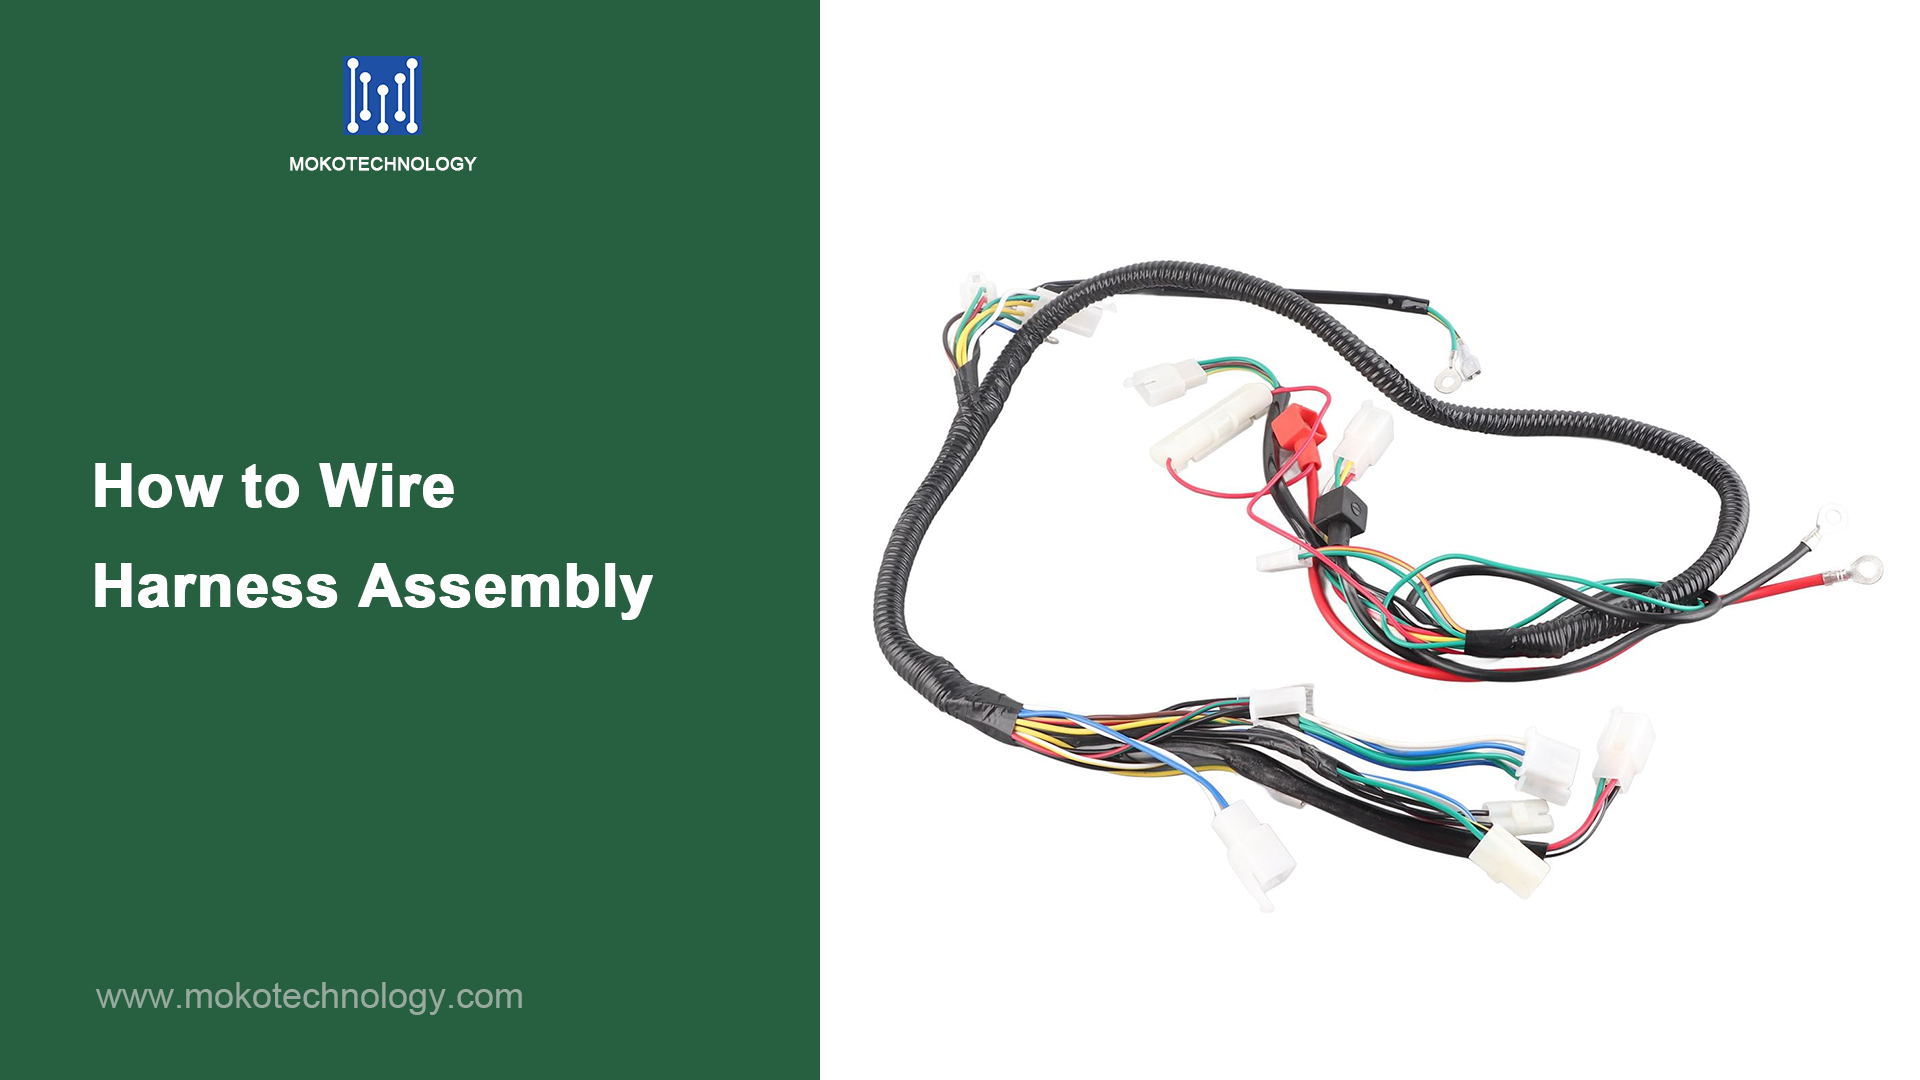 How to Wire Harness Assembly